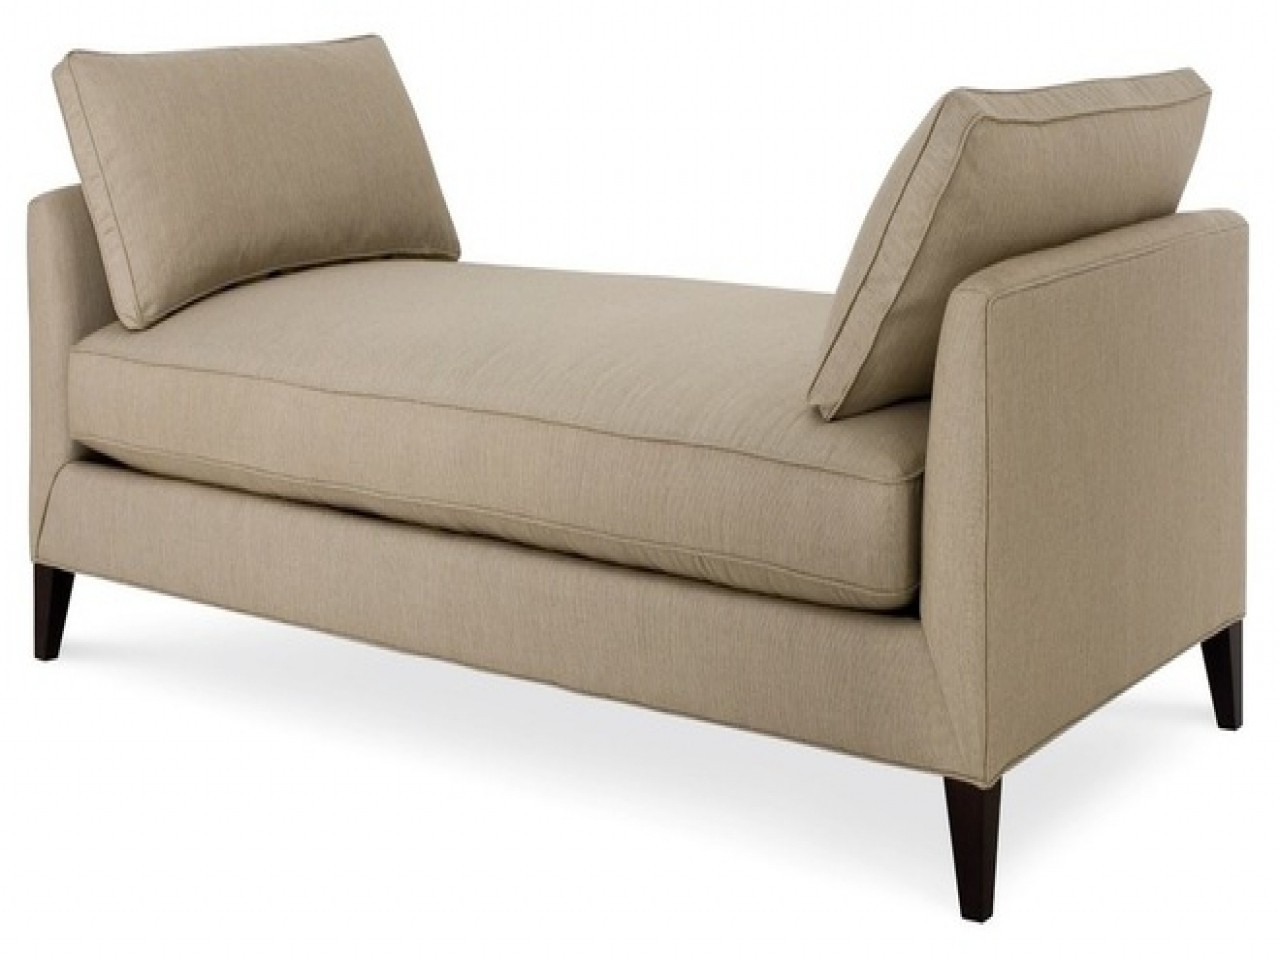 15 best collection of upholstered chaise lounges 5